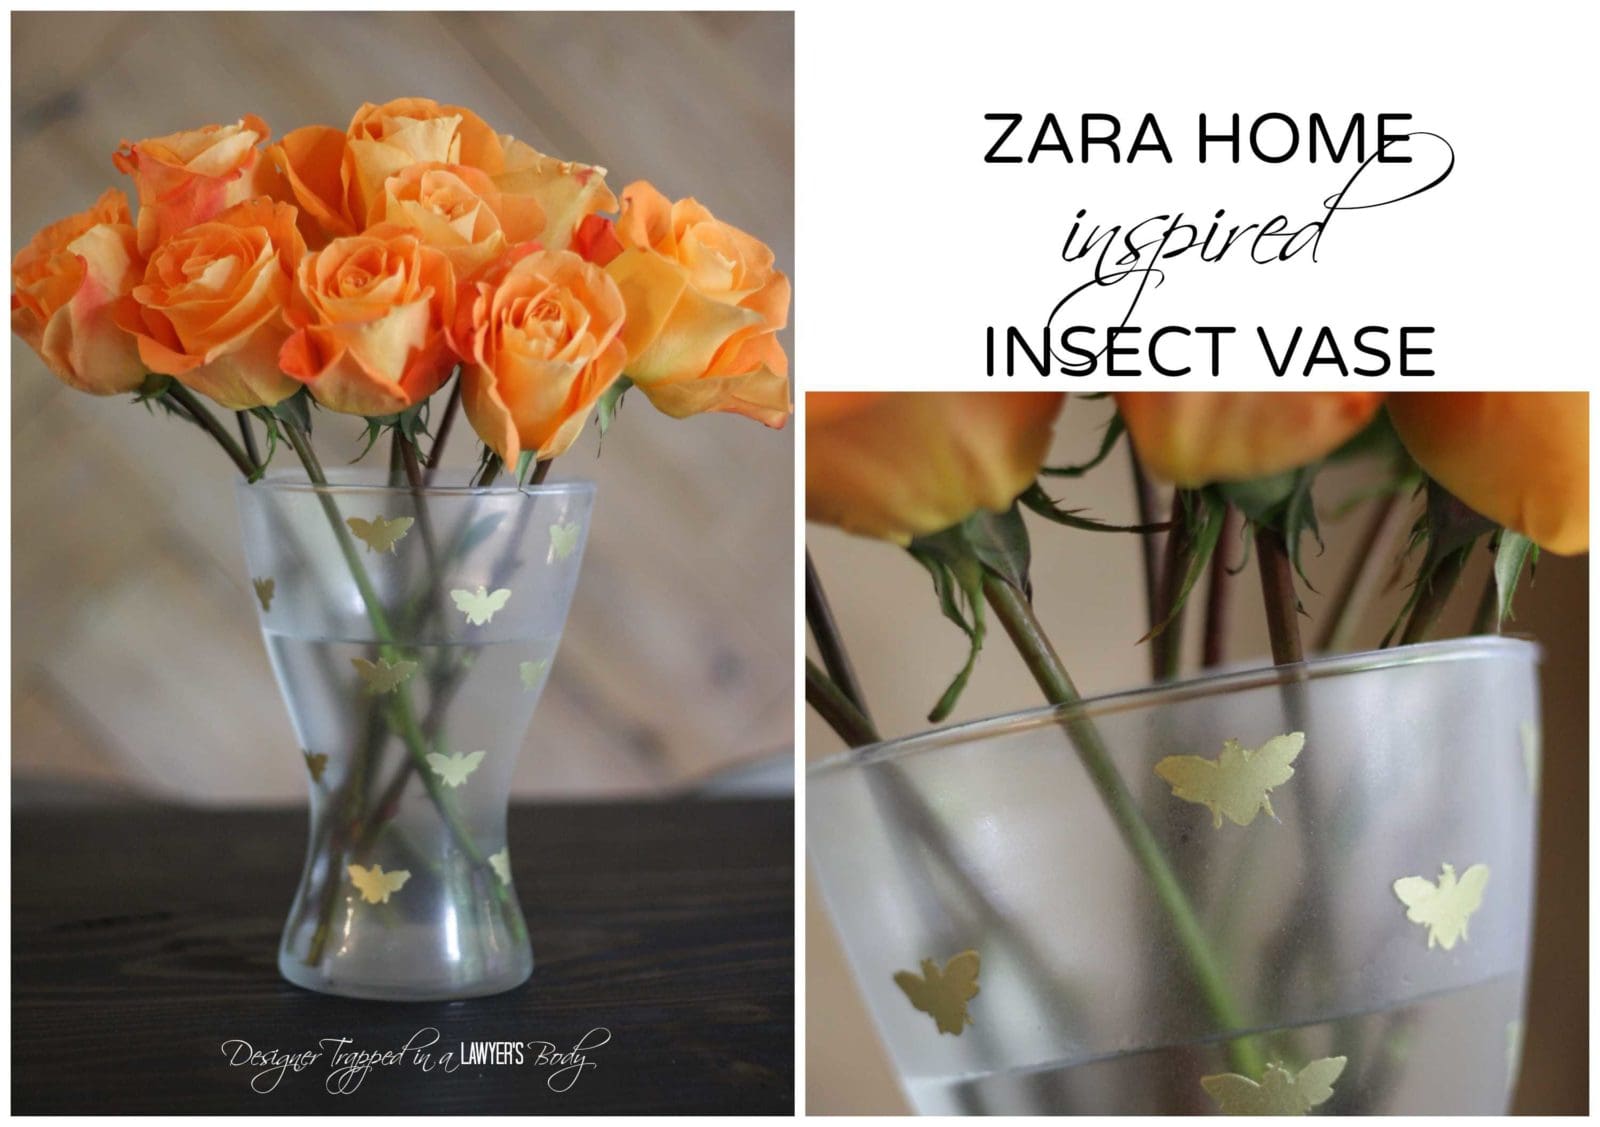 Pin now, read later! Knock off Zara Home Insect Vase by Designer Trapped in a Lawyer's Body. #zarahomeknockoff